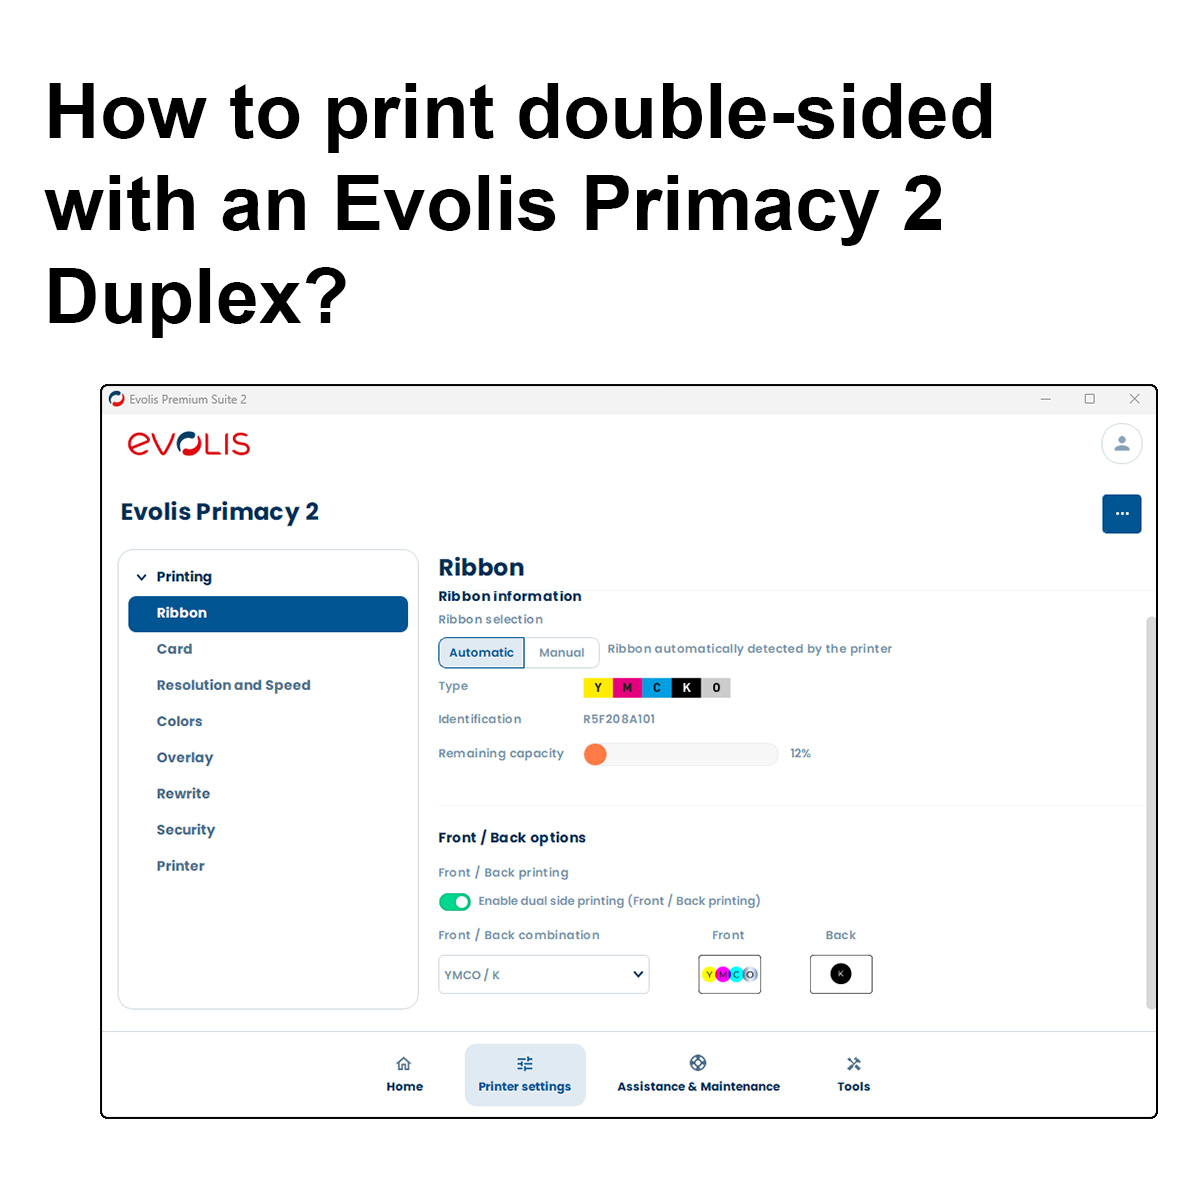 How to print double-sided with an Evolis Primacy 2 Duplex